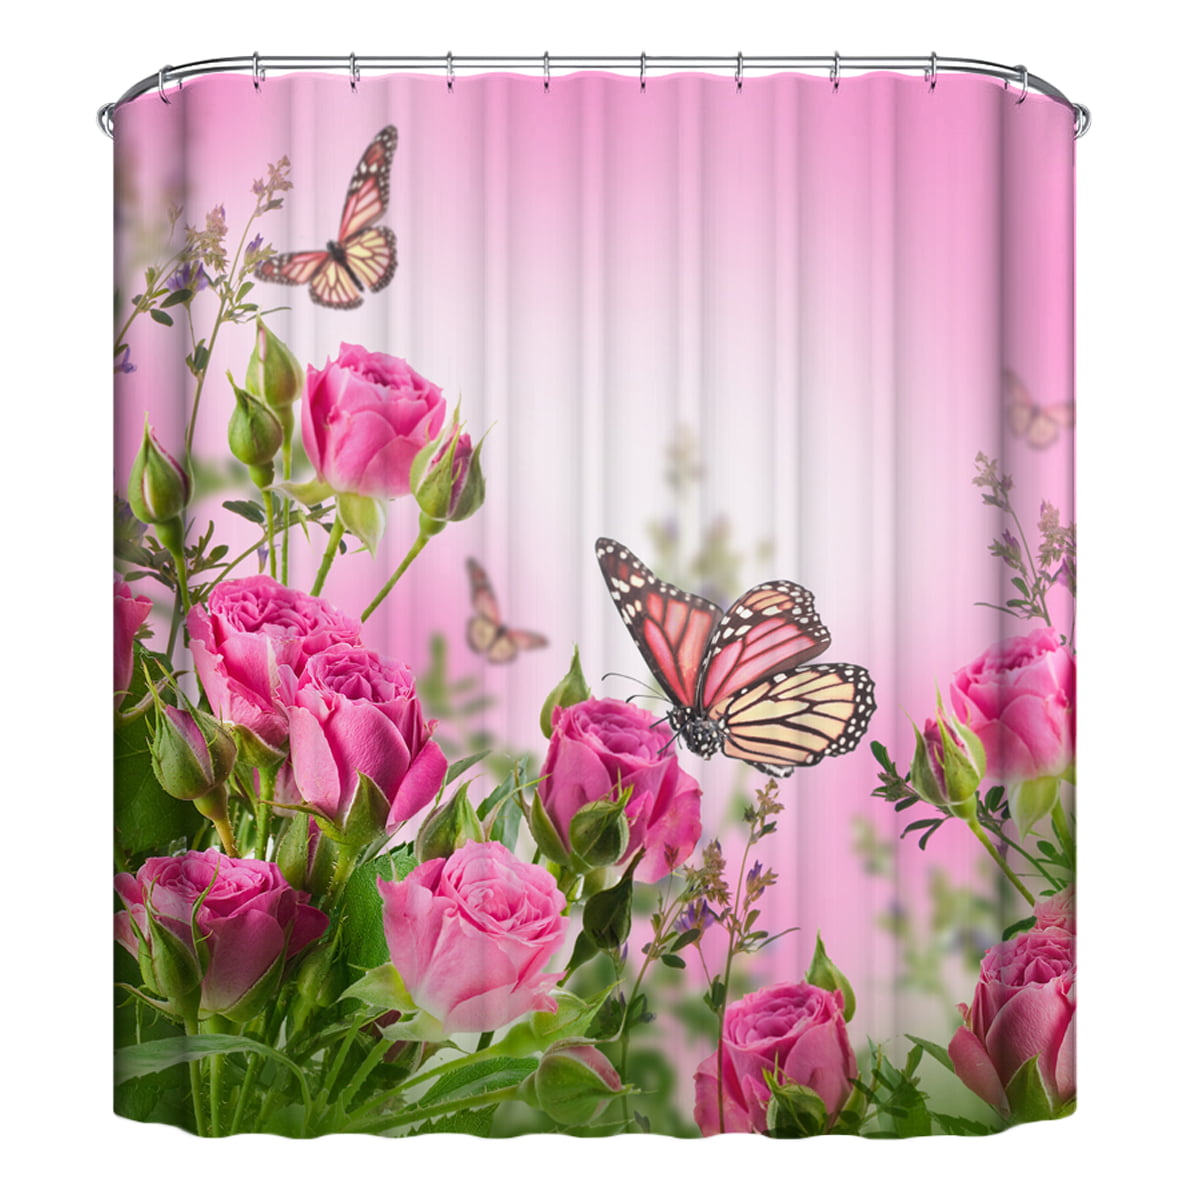 Details about   Spring Wildflowers Butterfly Wood Fence Fabric Shower Curtain Set Bathroom Decor 